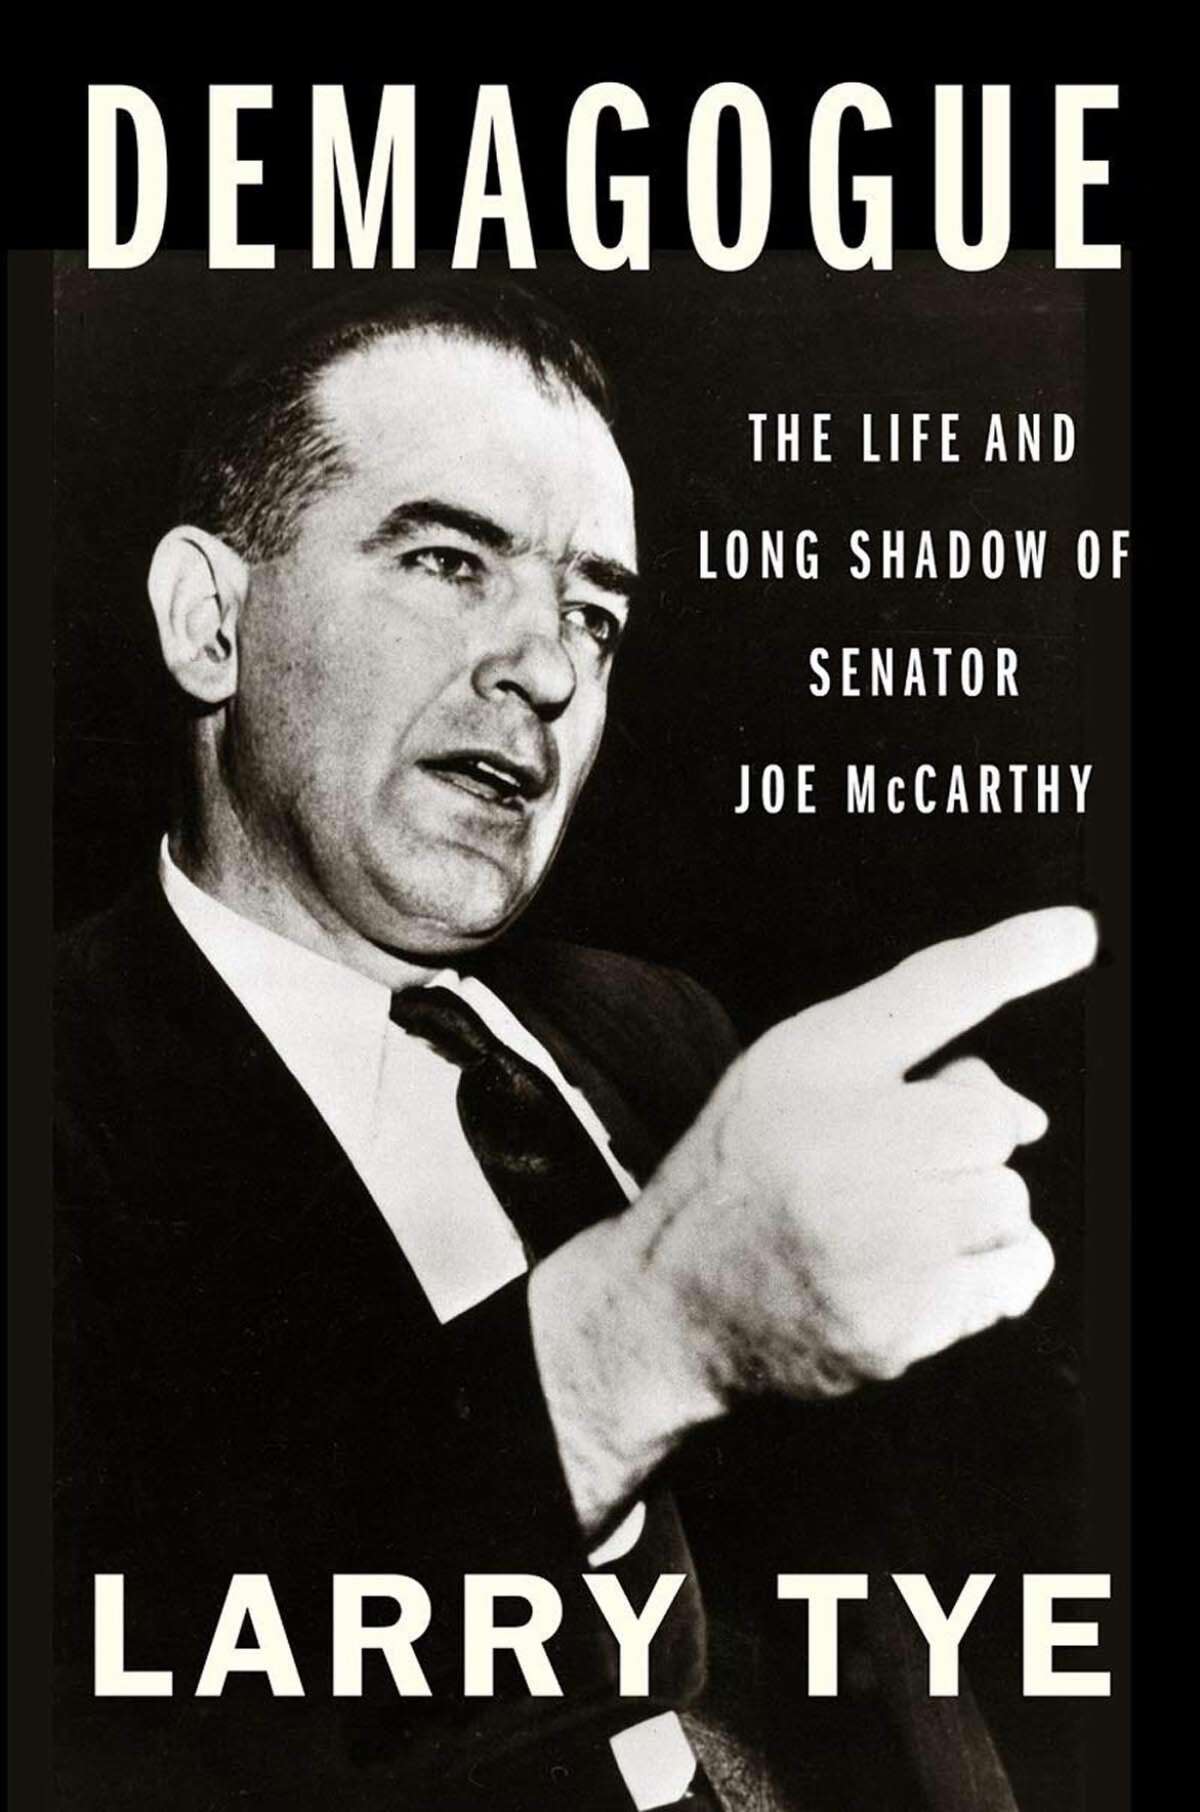 Bestselling author Larry Tye will discuss his new book, Demagogue: The Life and Long Shadow of Senator Joe McCarthy, on July 13 at 5 p.m. with Dan Haar, columnist and associate editor at Hearst Connecticut Media. The conversation, which is organized by House of Books in Kent, will be held on Crowdcast.